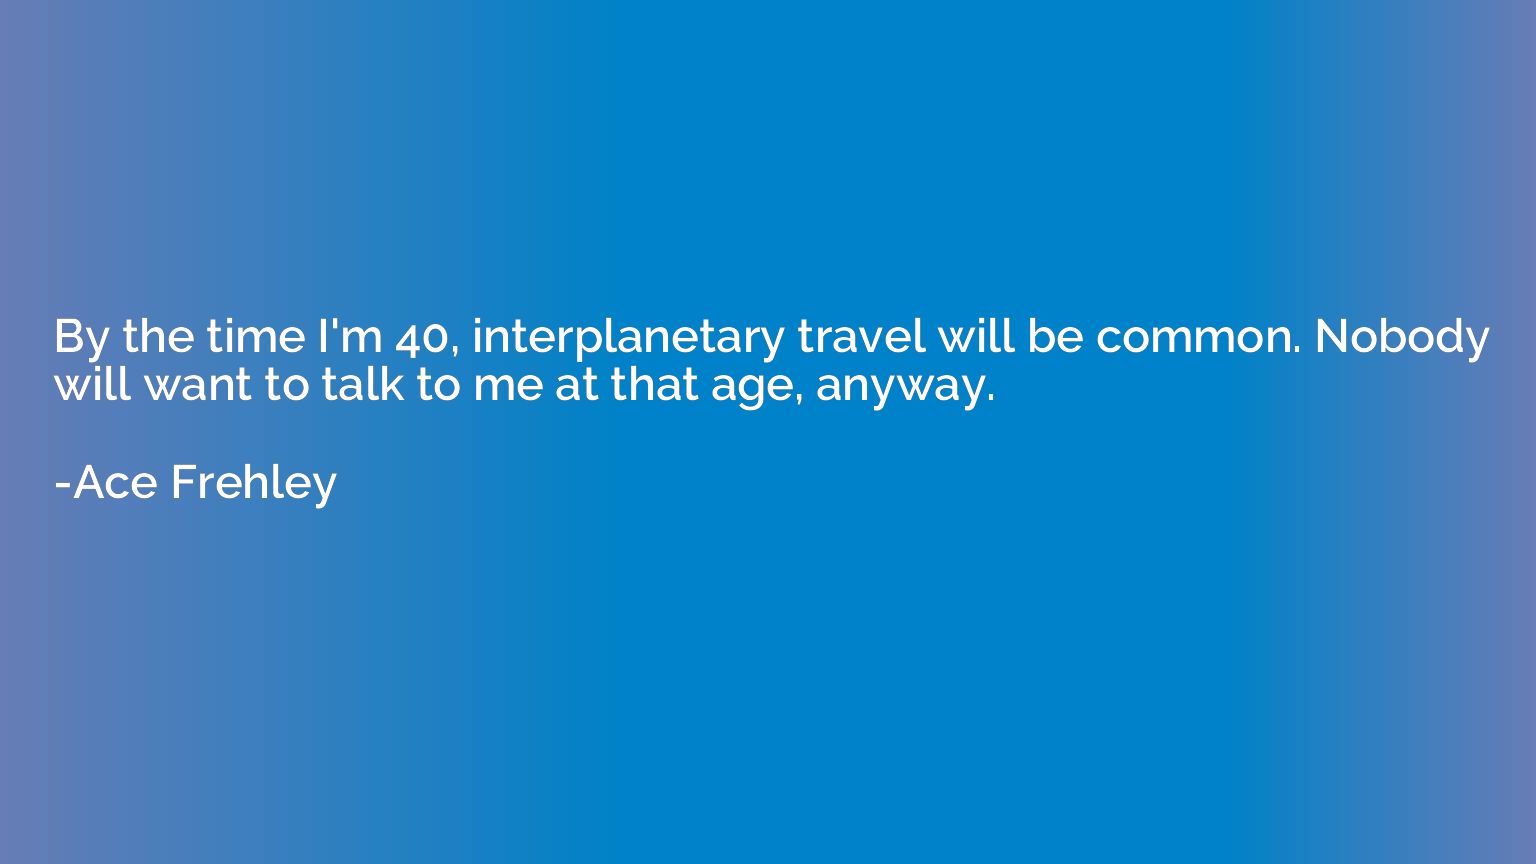 By the time I'm 40, interplanetary travel will be common. No